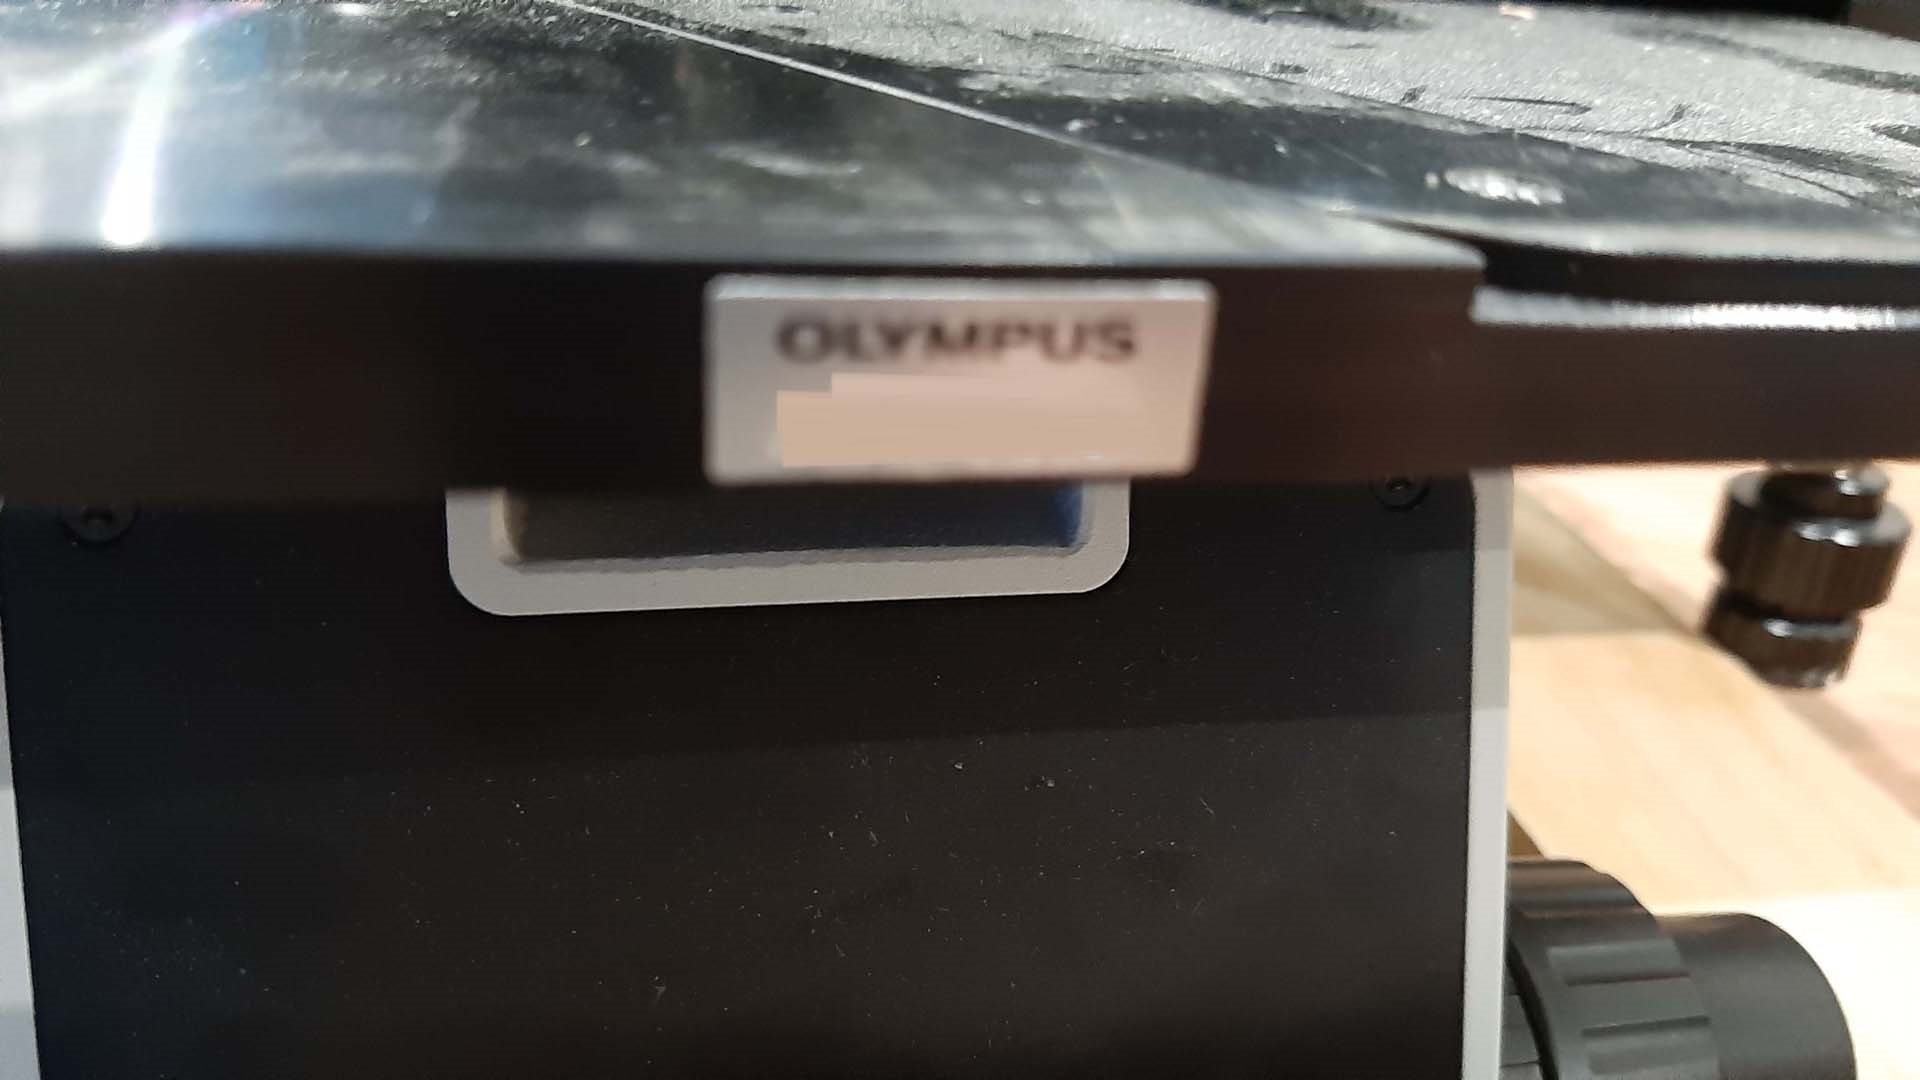 Photo Used OLYMPUS MX50L-RF For Sale